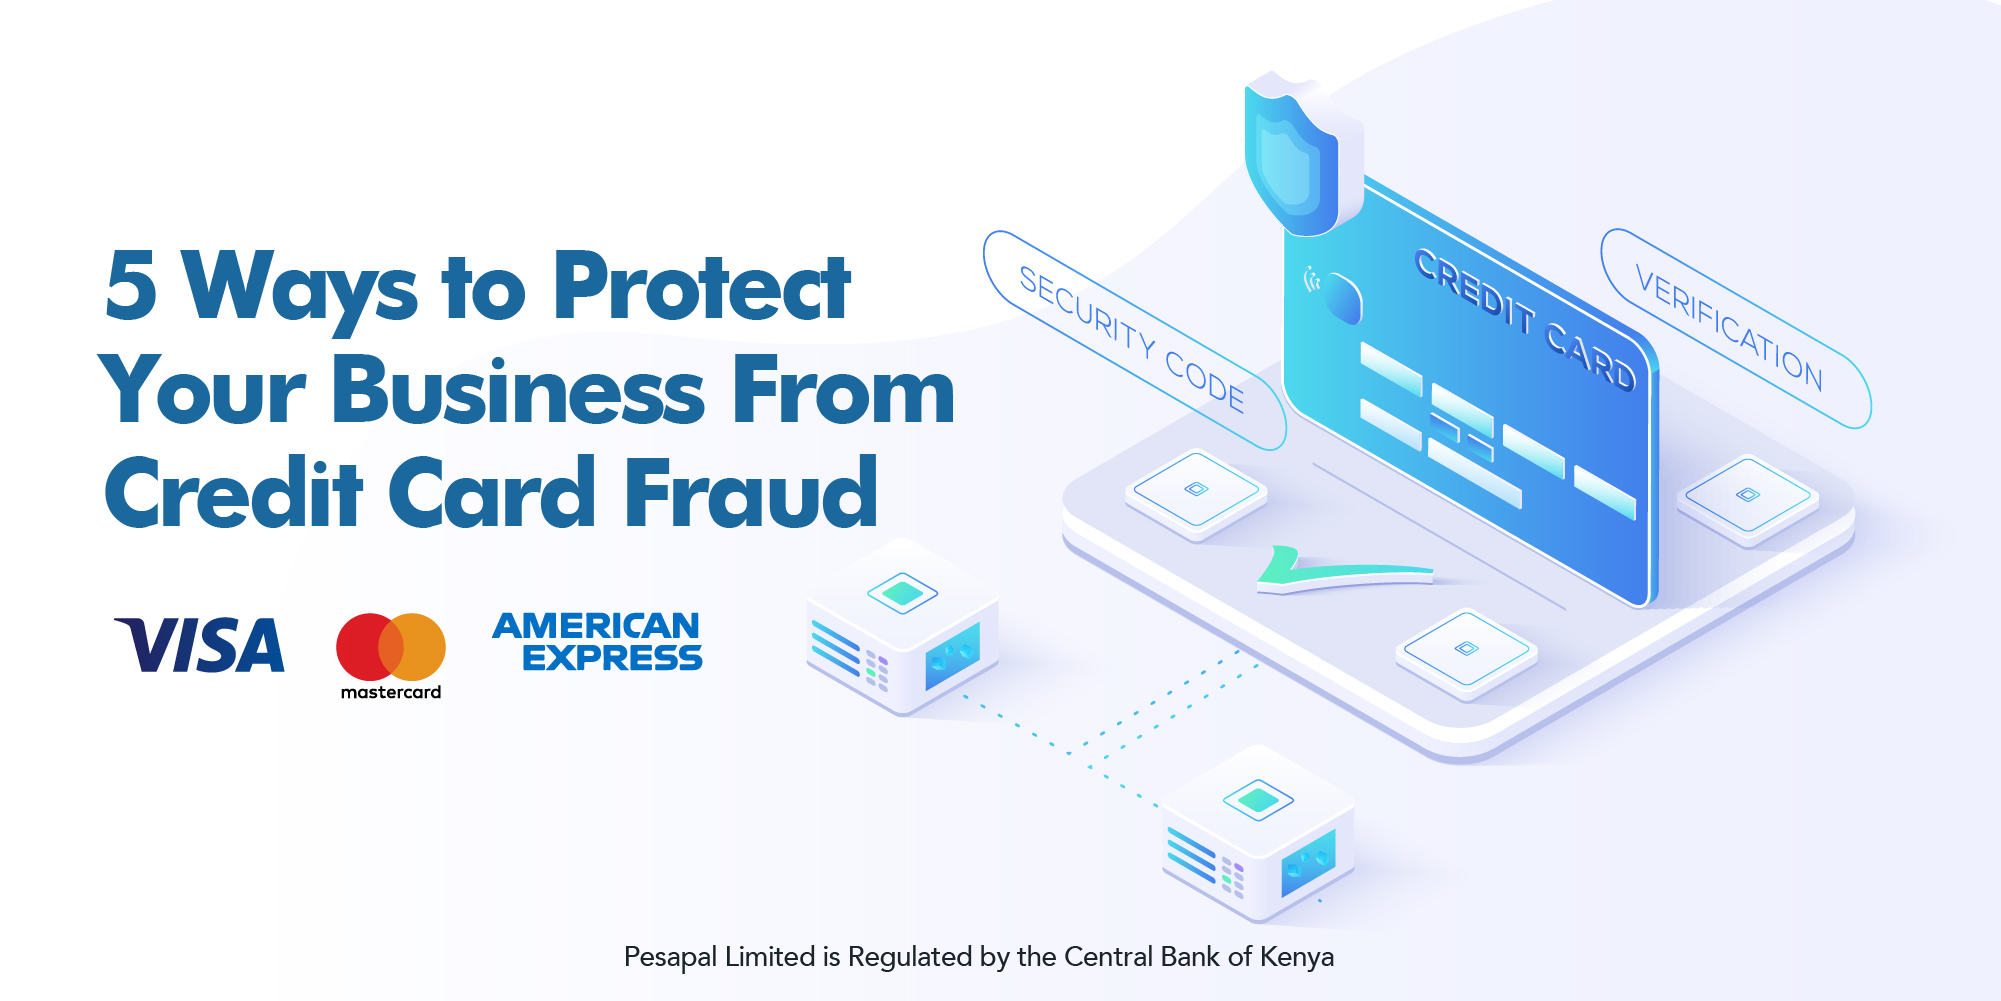 5 Ways to Protect Your Business from Credit Card Fraud